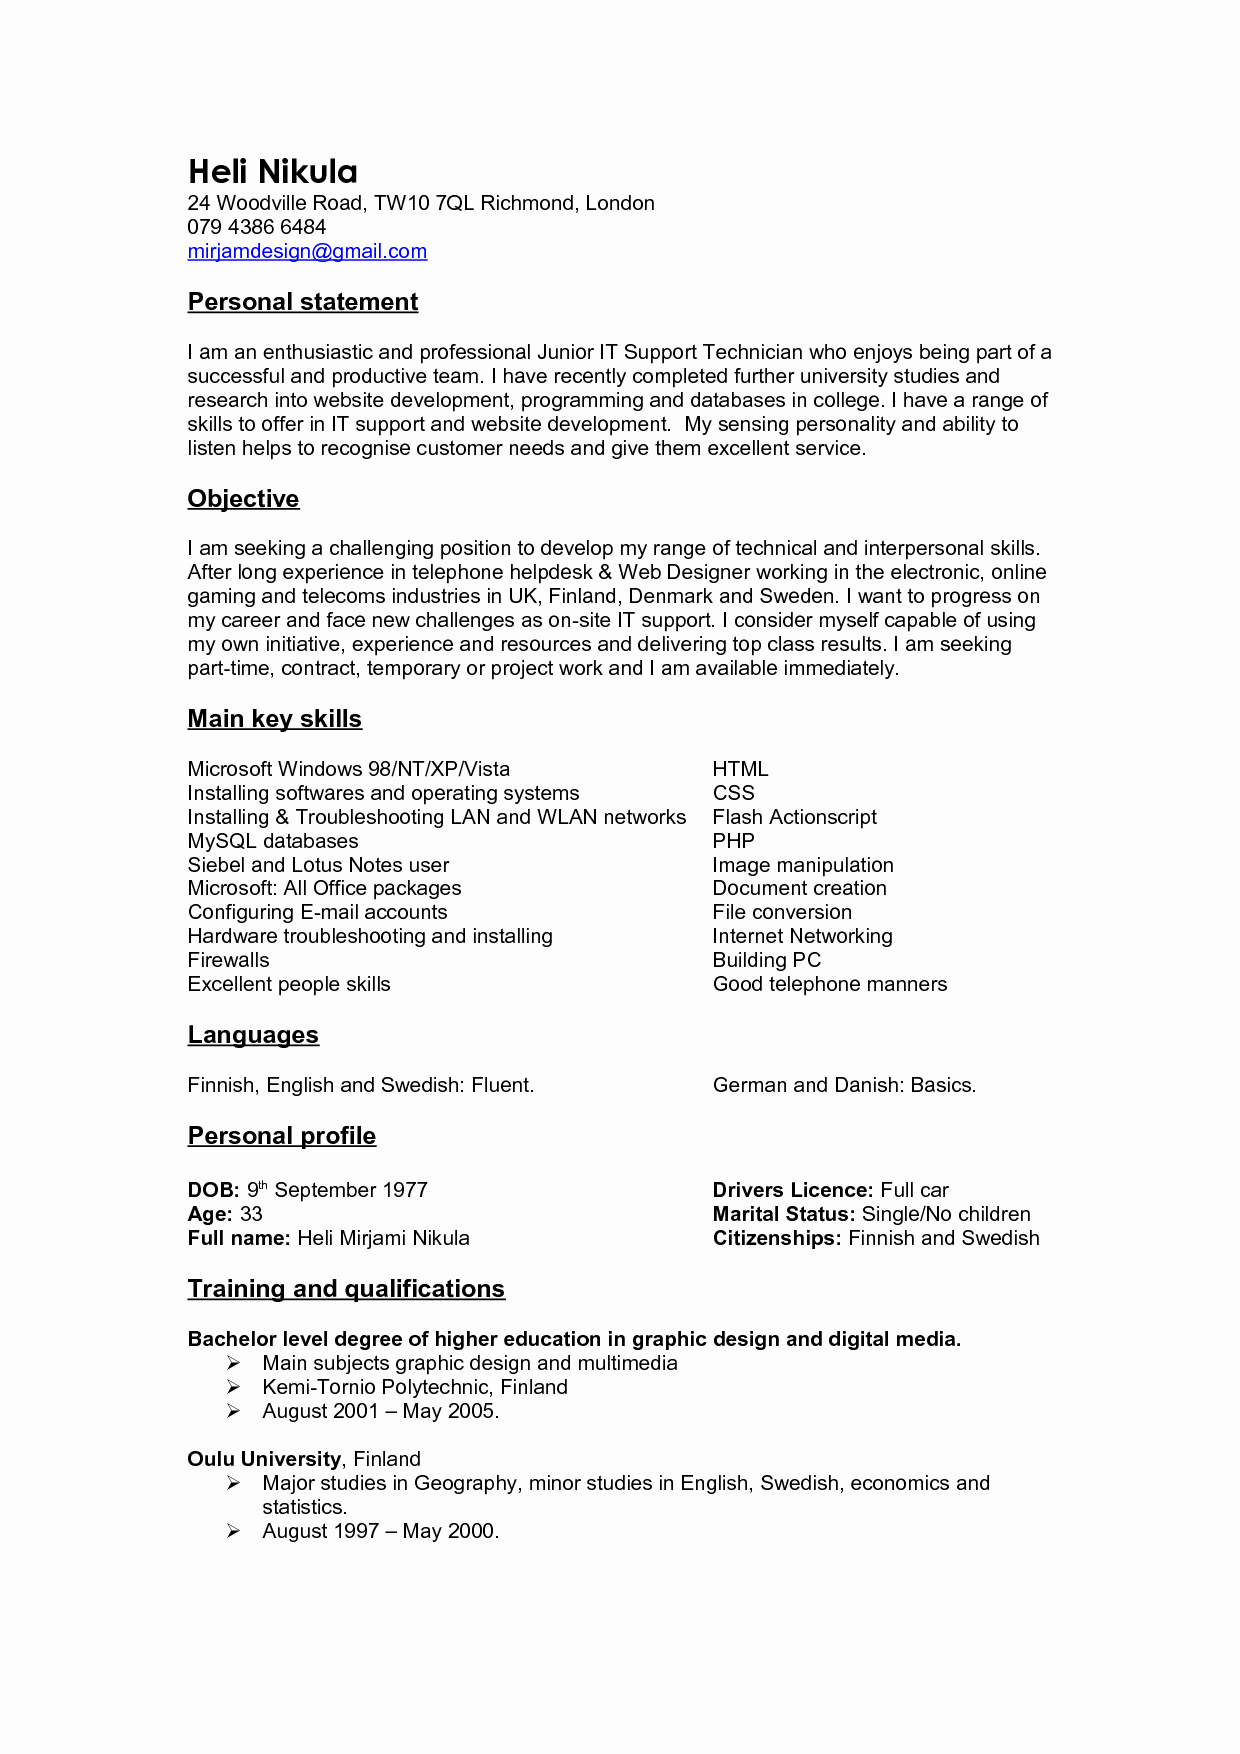 Personal Brand Statement Samples Fresh Personal Branding Statement Resume Examples